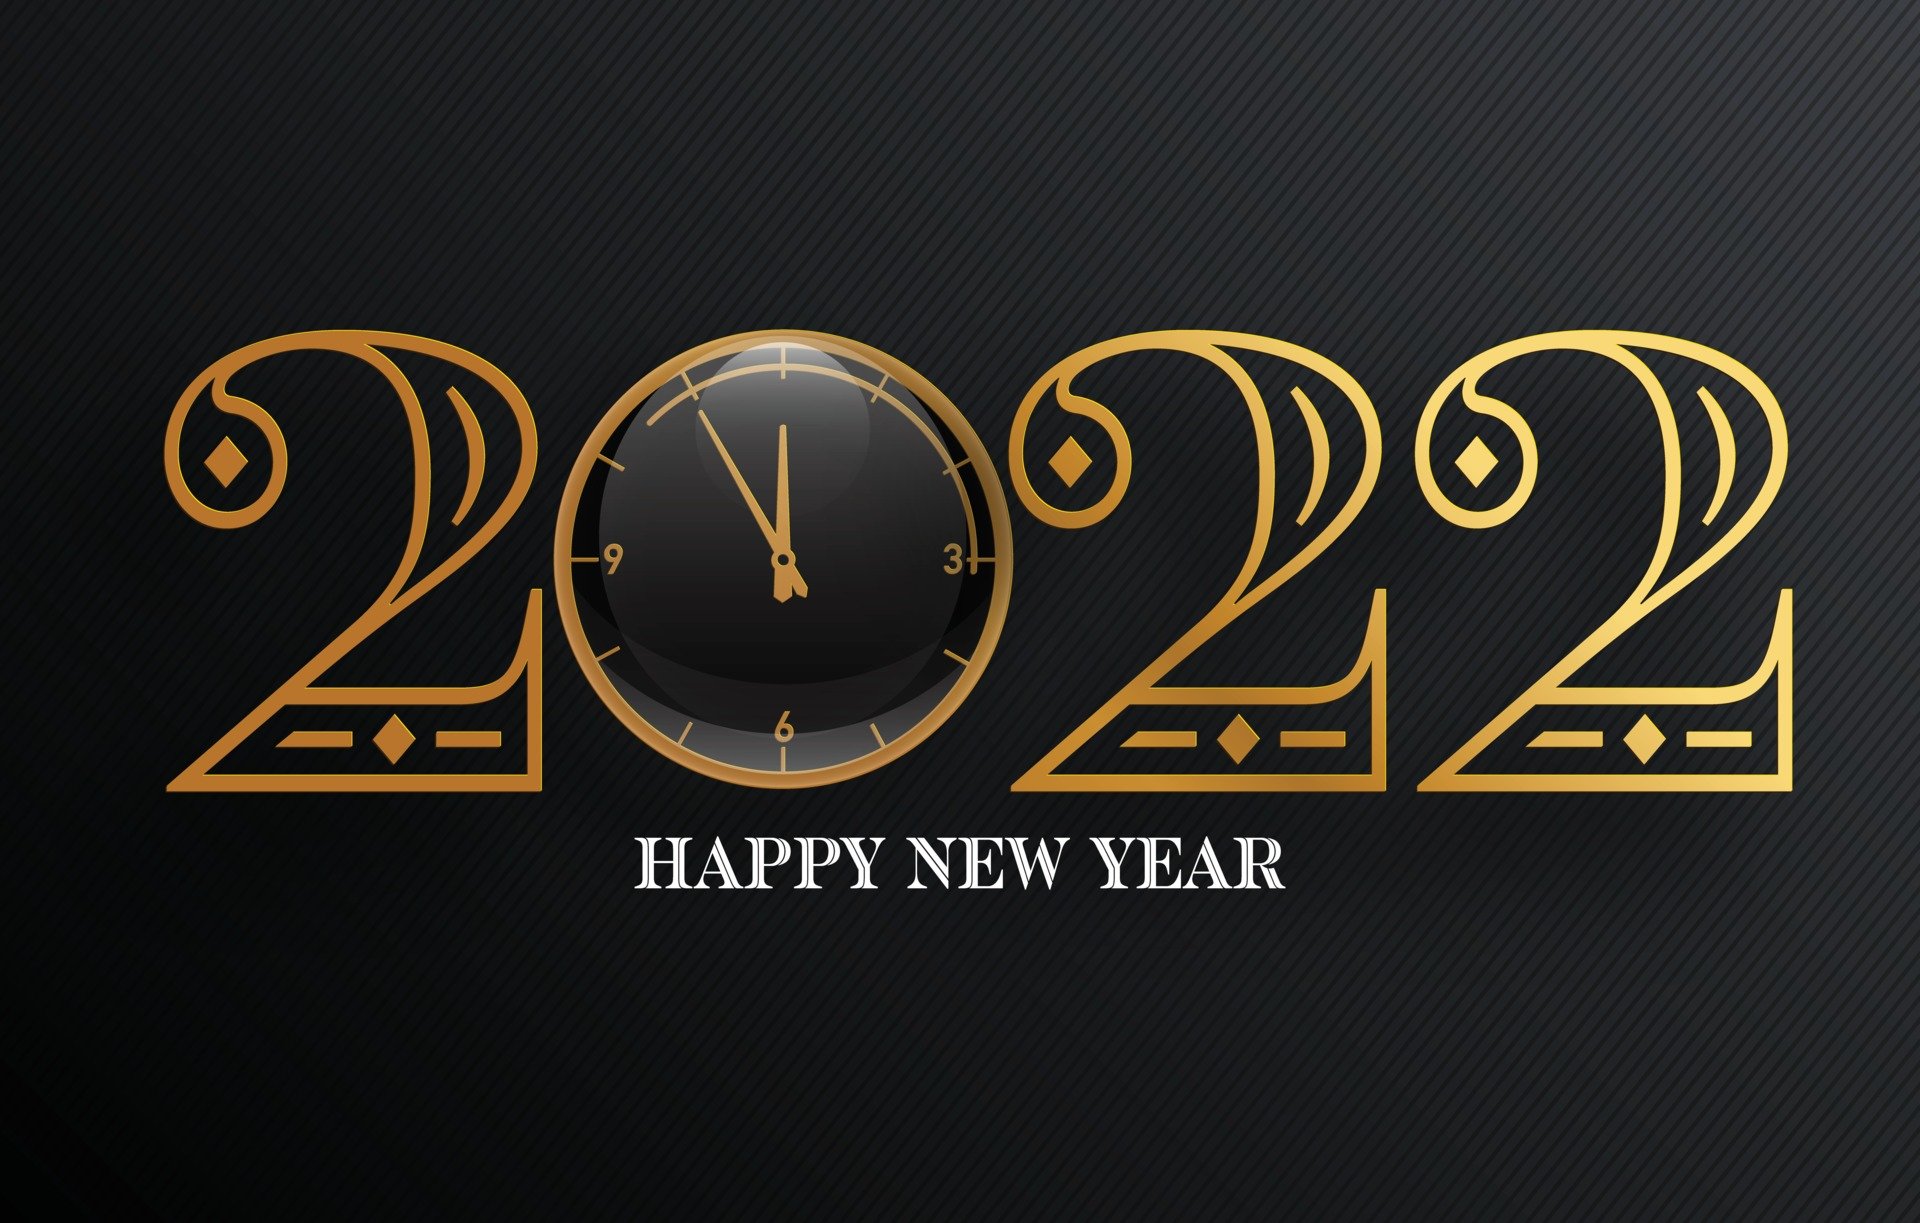 happy new year images 2022 download